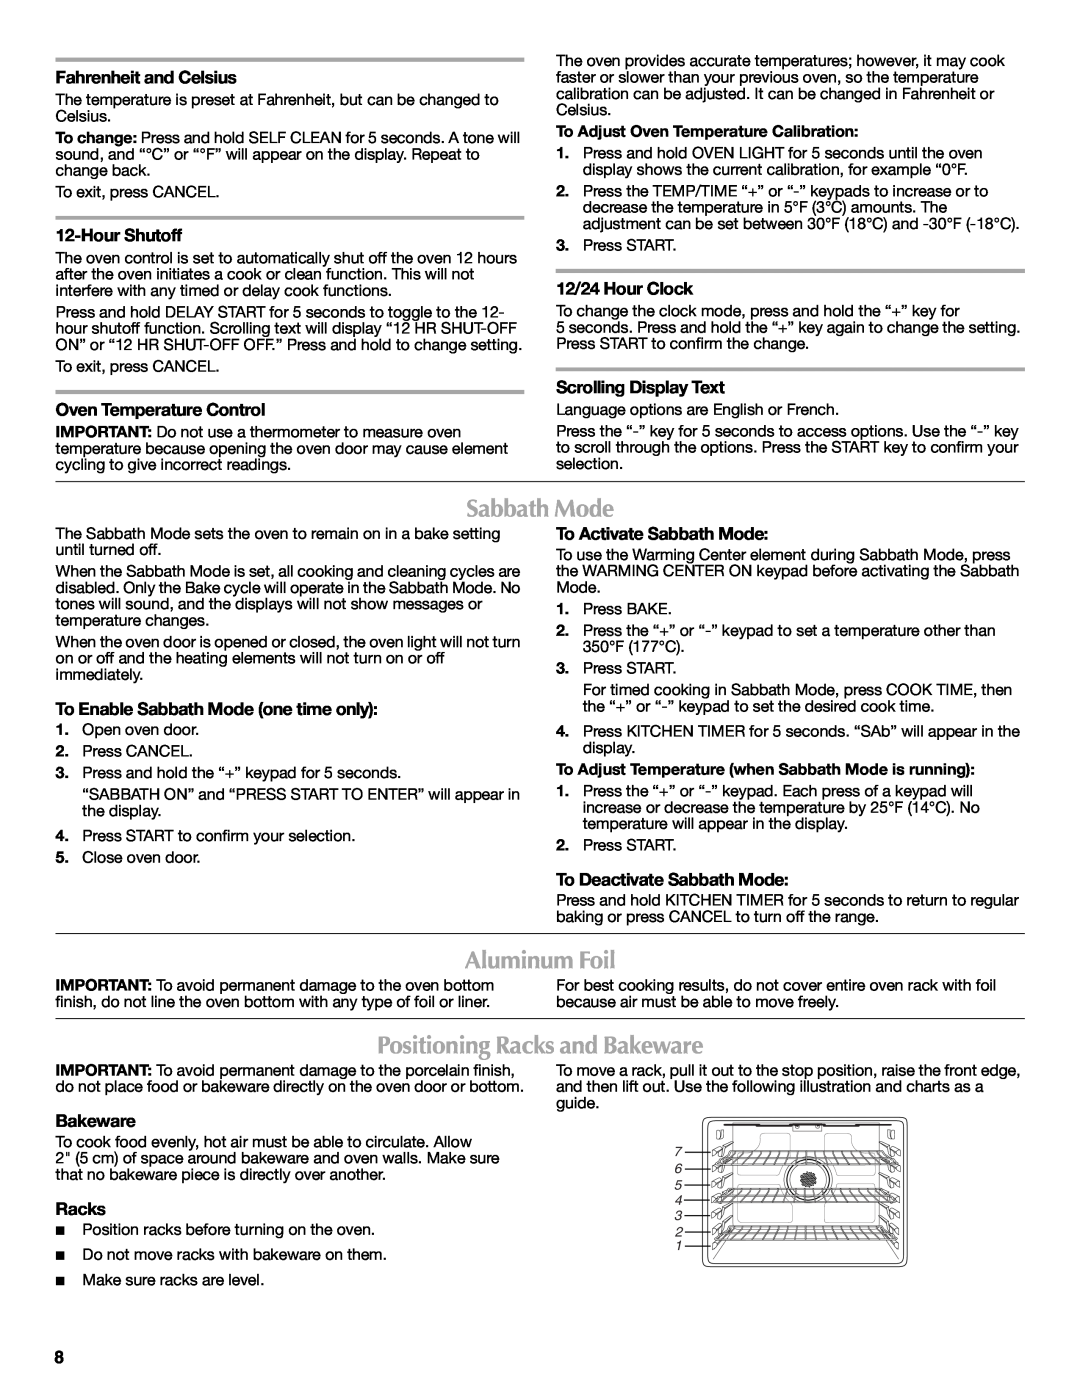 Maytag W10249694A Sabbath Mode, Aluminum Foil, Positioning Racks and Bakeware, Fahrenheit and Celsius, Hour Shutoff 